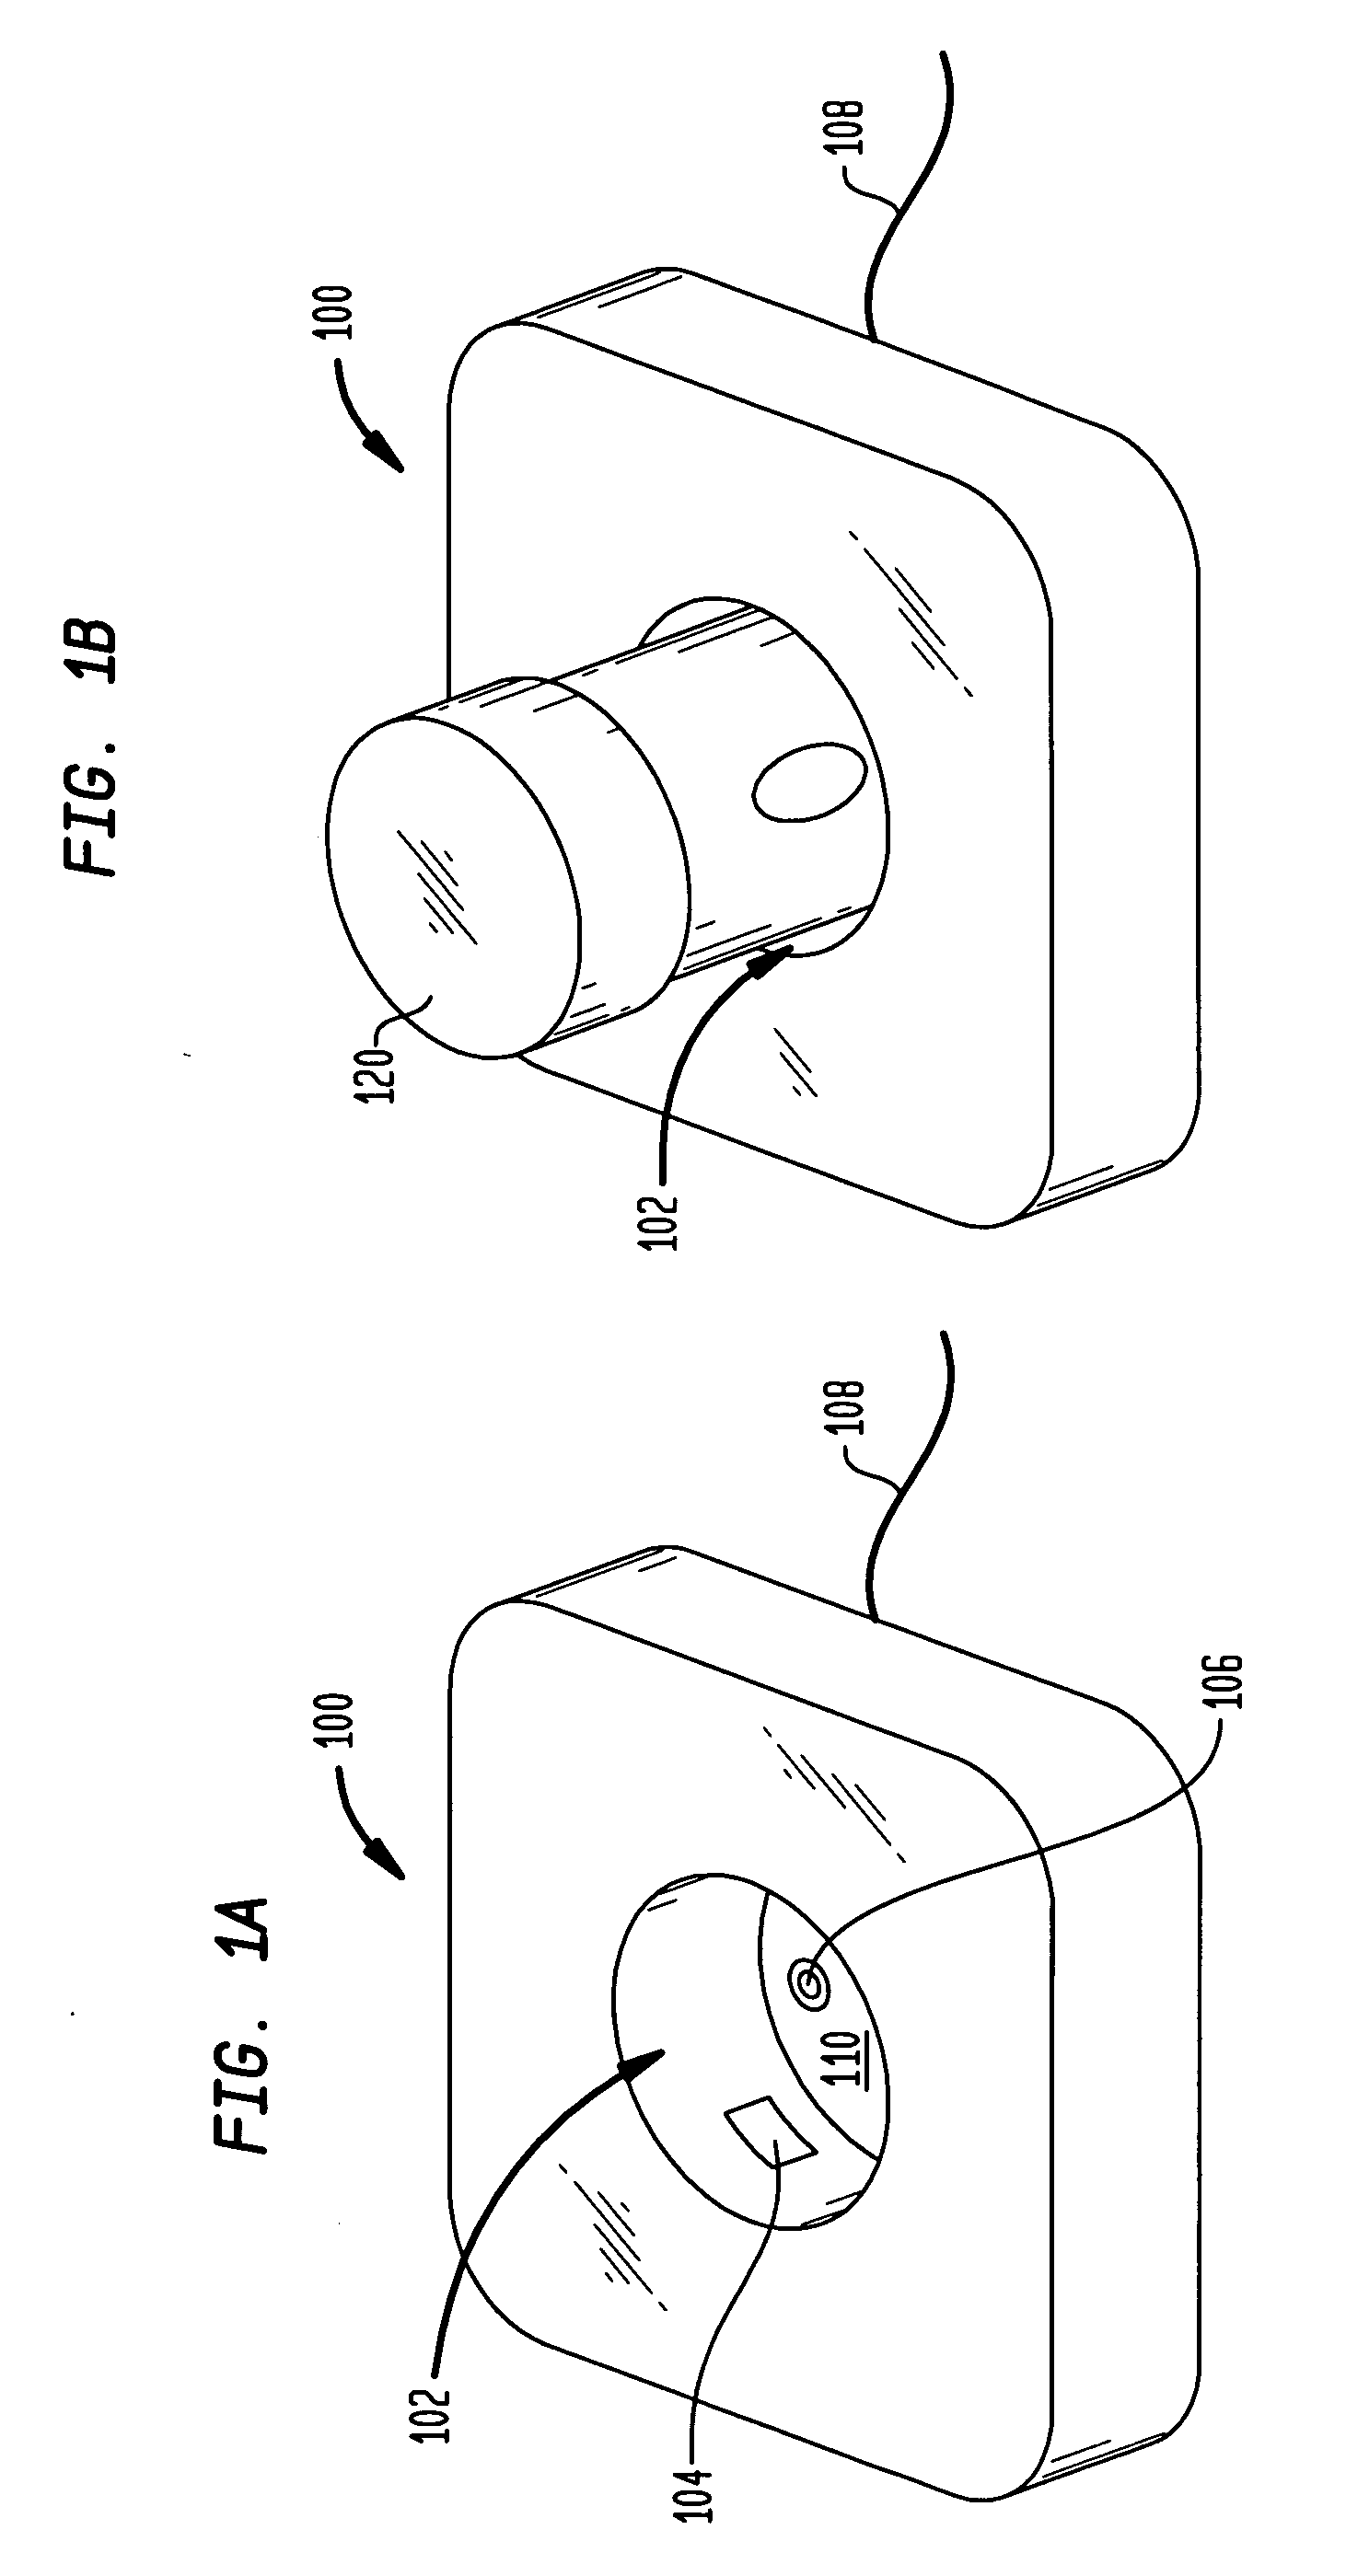 Method of managing a large array of non-volatile memories